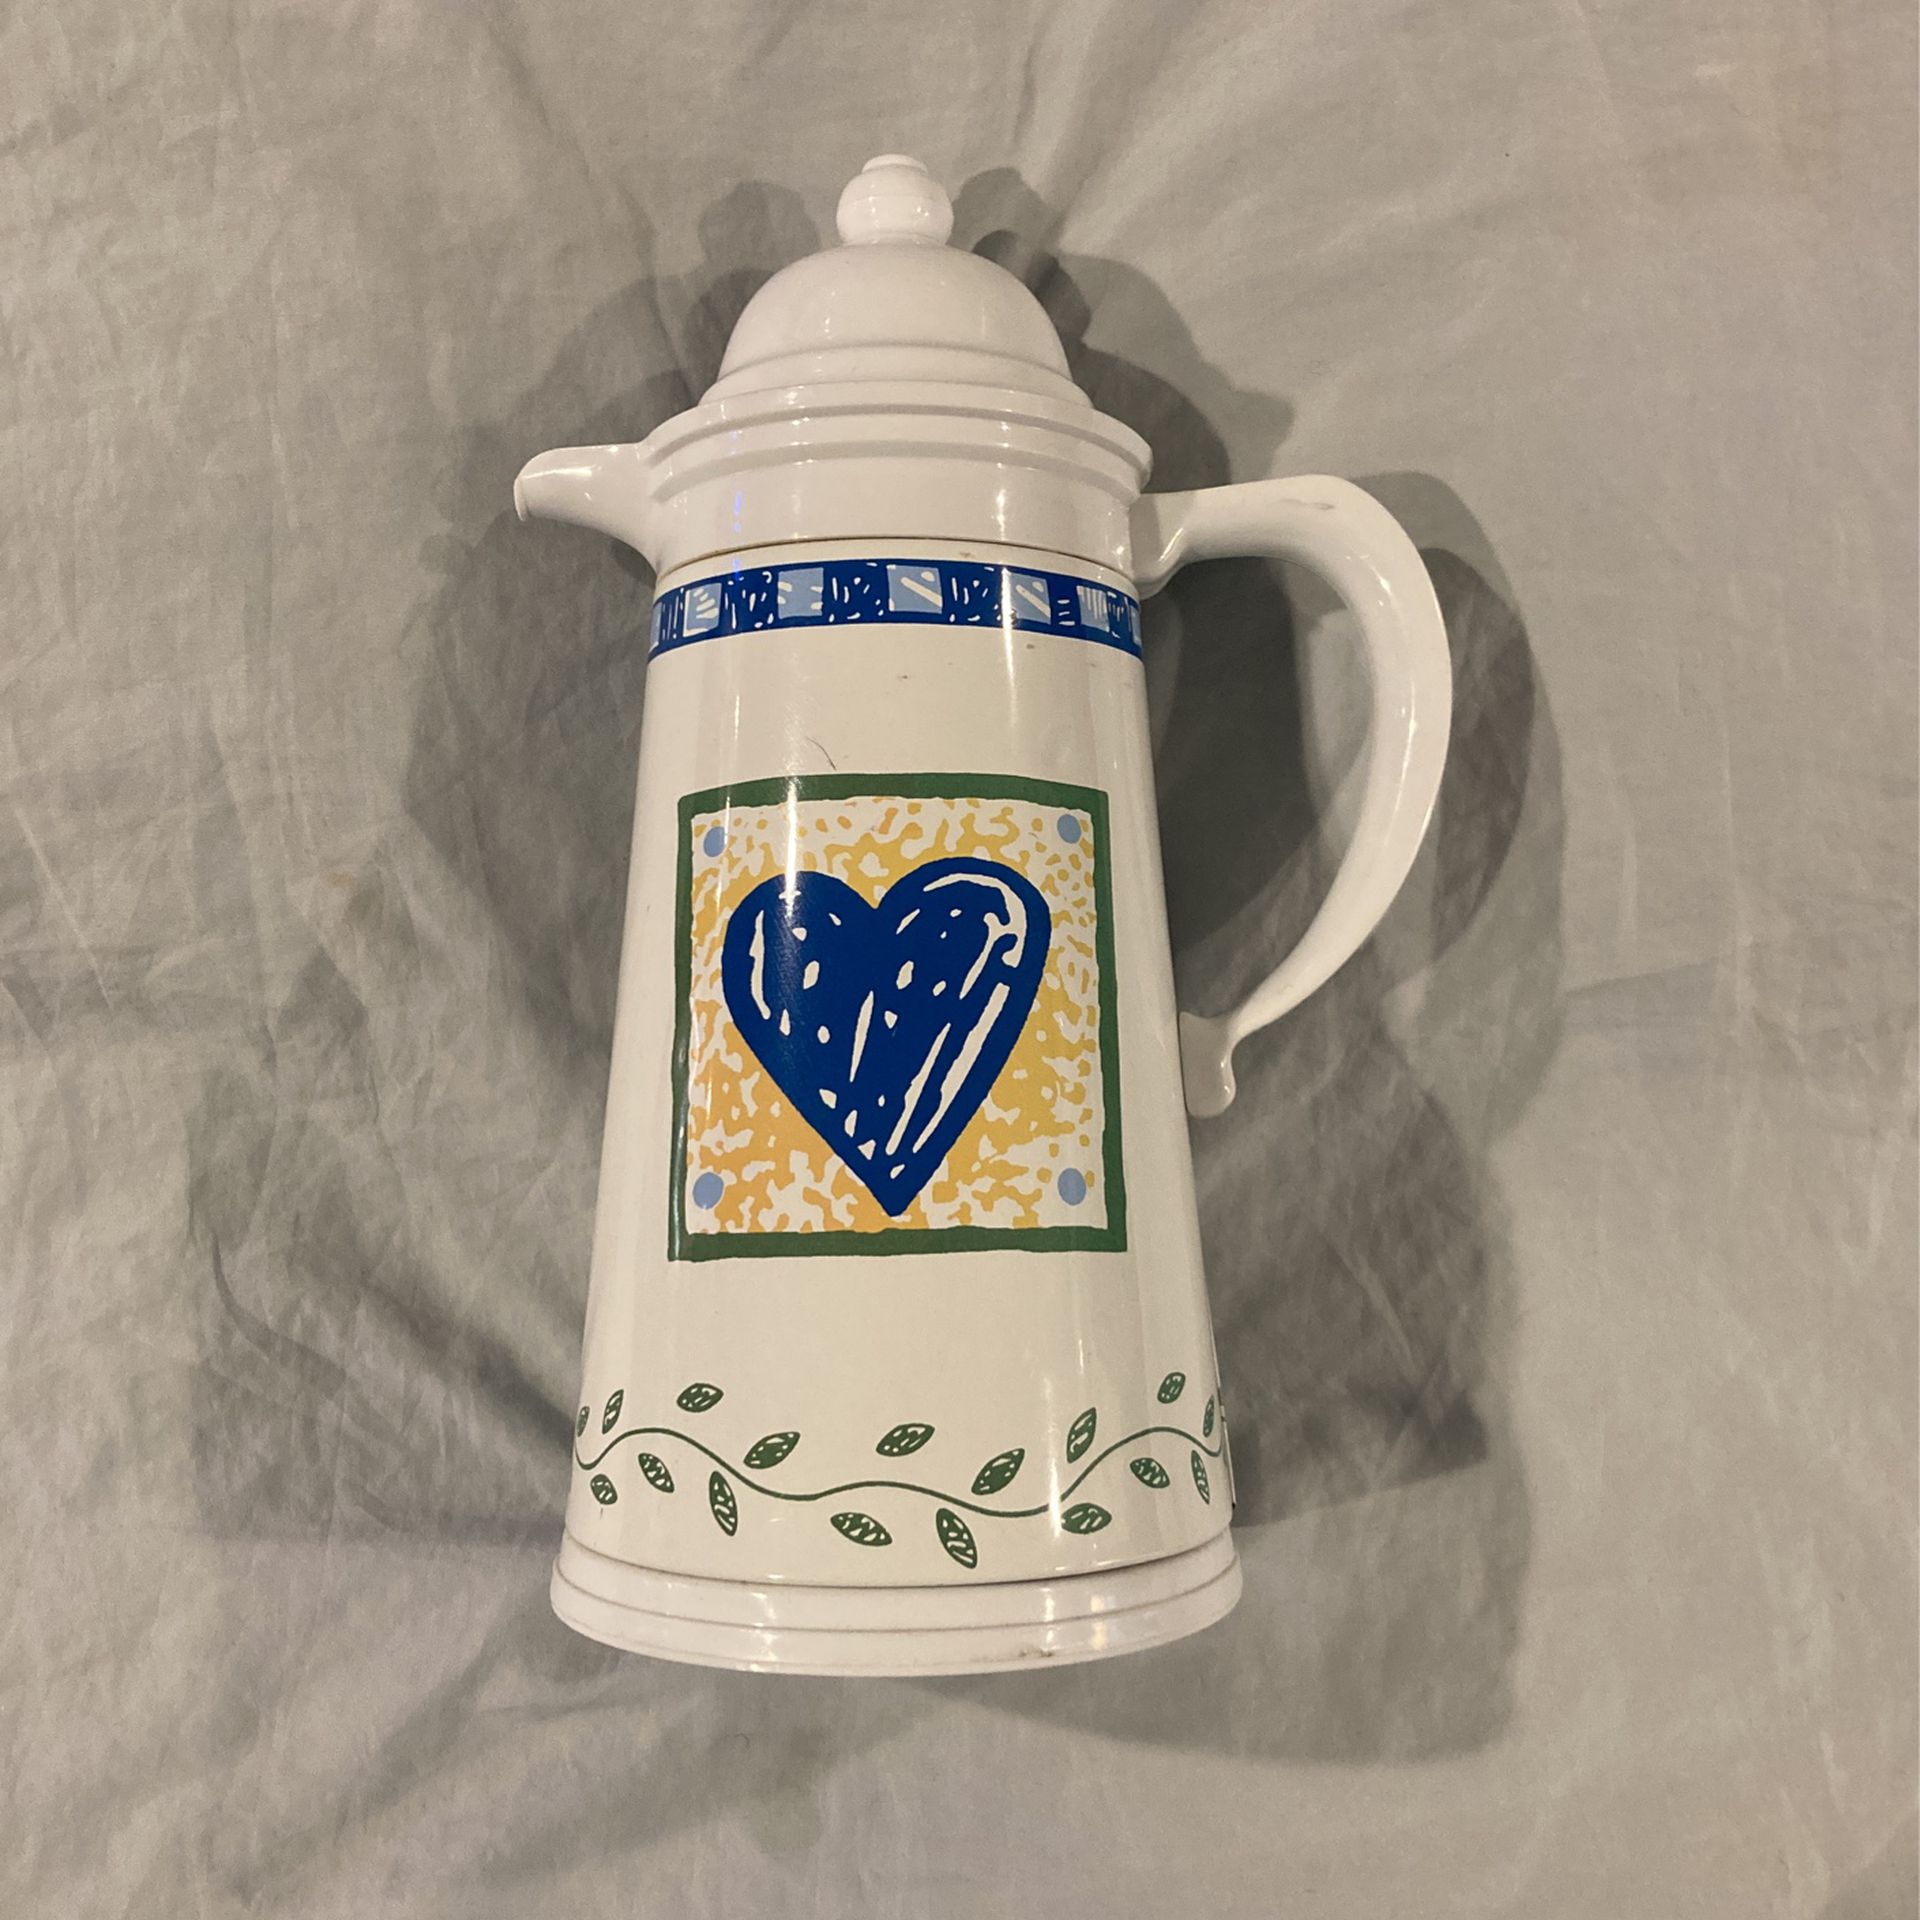 Thermos Coffee Pitcher - Carafe - Blue Heart - Coffee Server - Thermique - Thermal - Pitcher